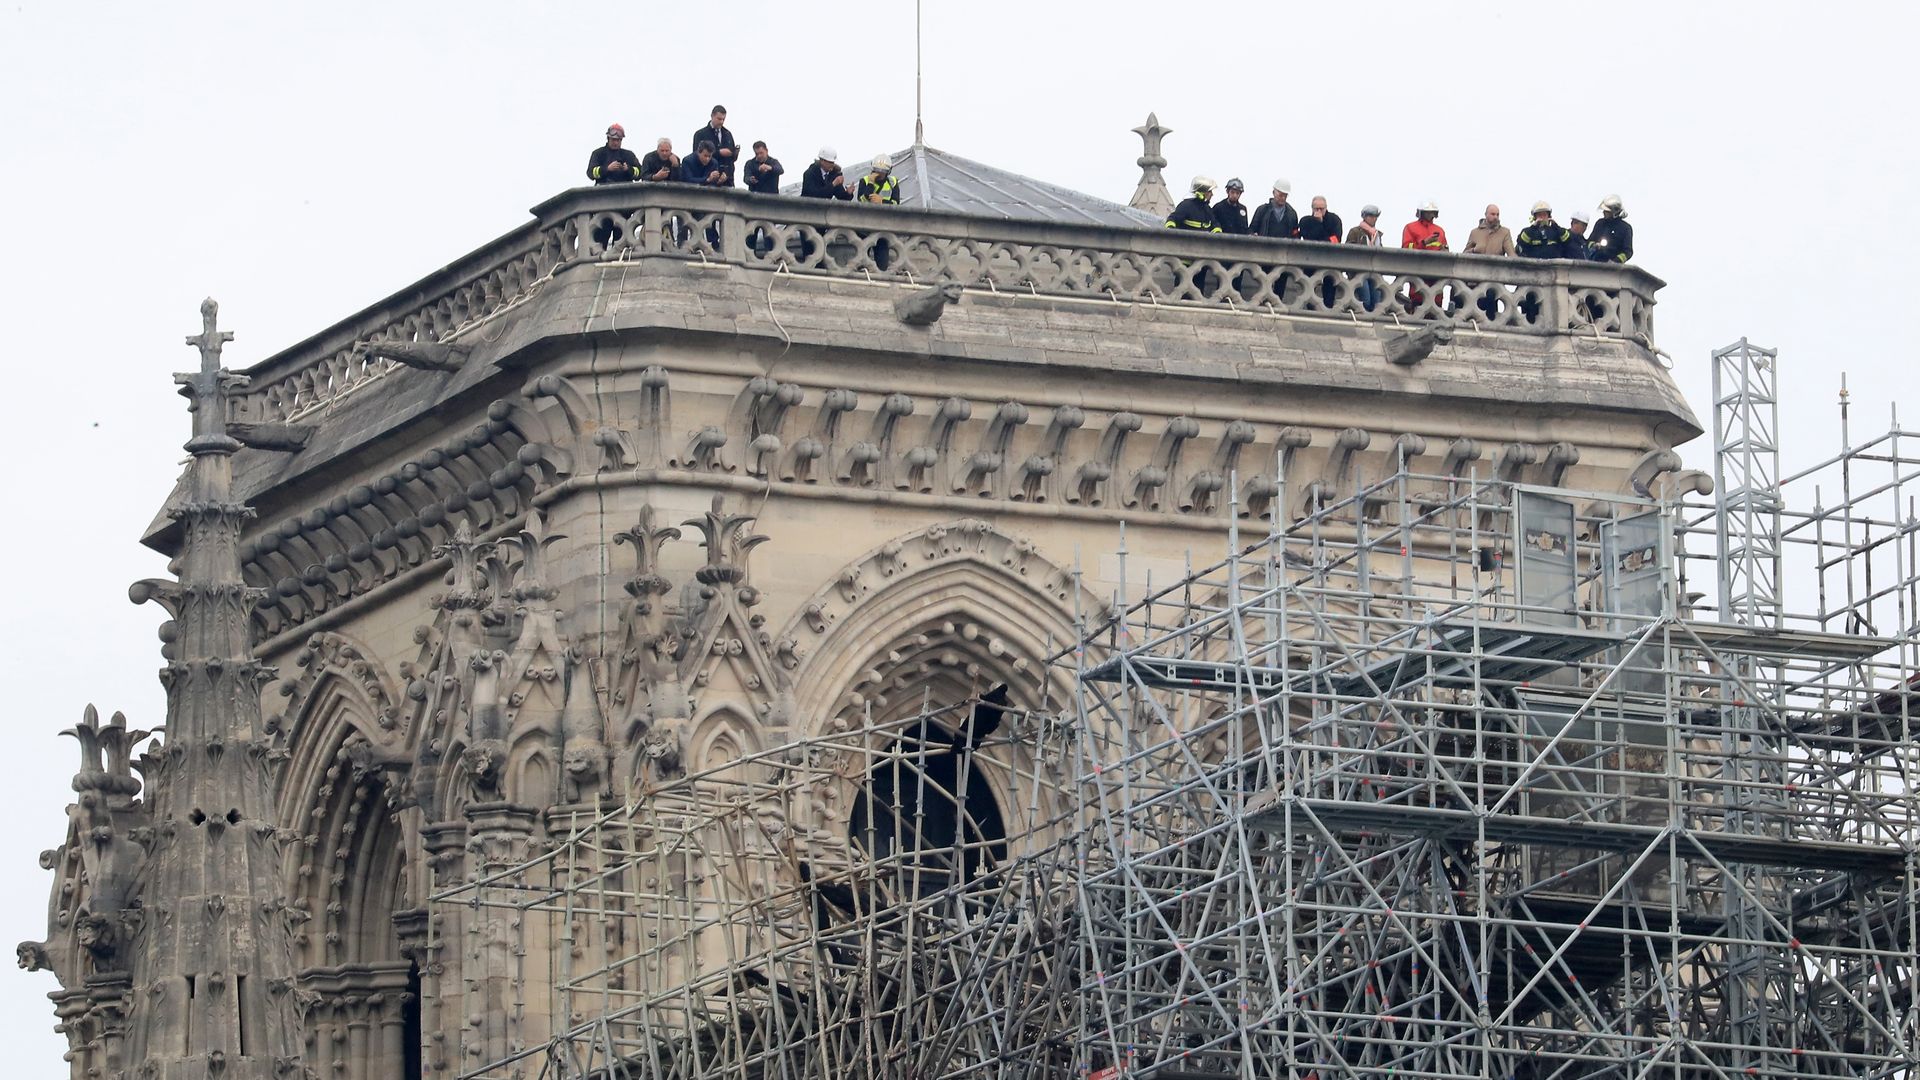  The Notre Dame Cathedral in Paris following a fire which destroyed much of the building on Monday evening.